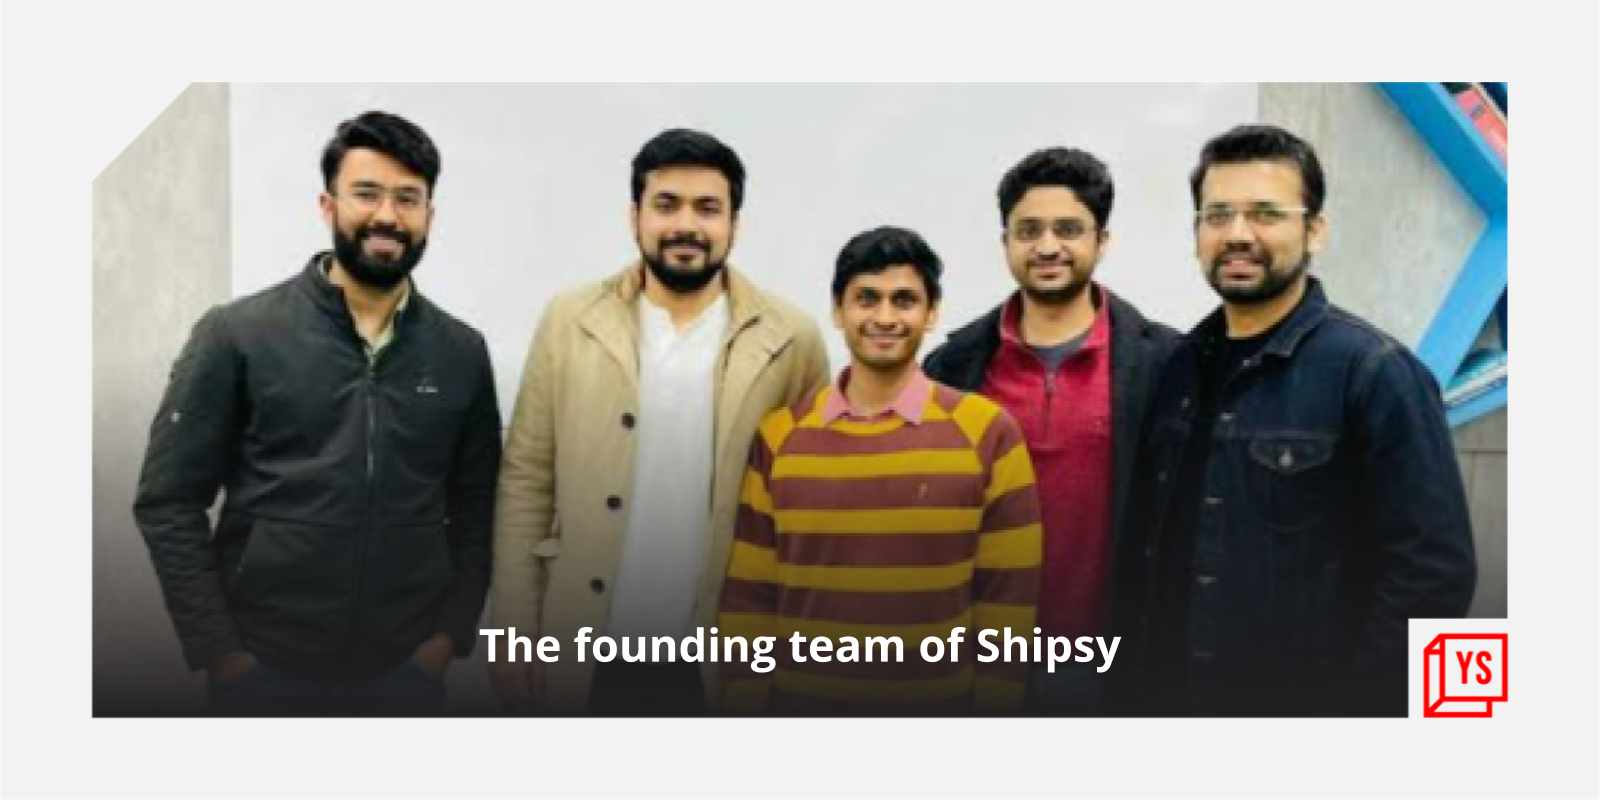 [Funding alert] Shipsy raises $25M in Series B co-led by A91 Partners, Z3 Partners